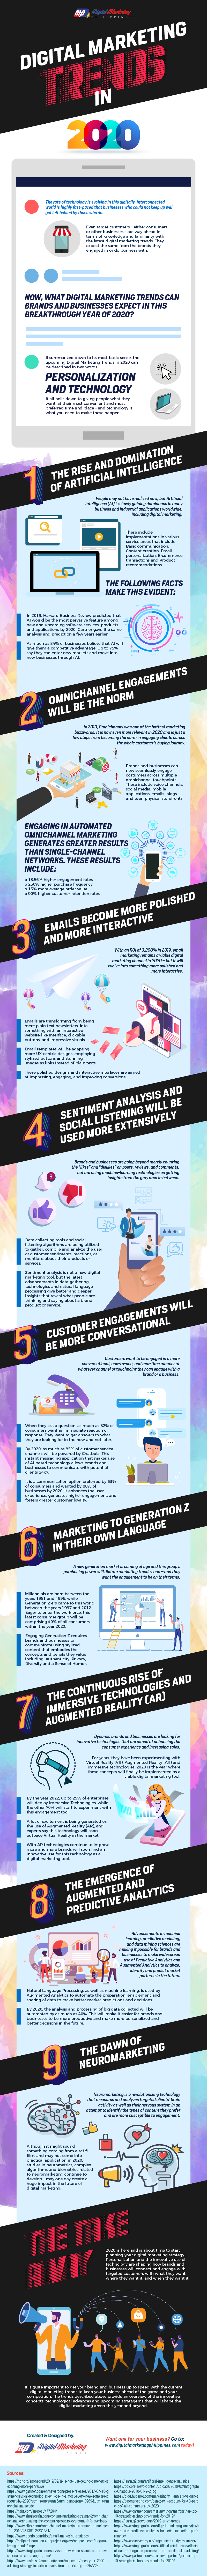 Digital Marketing Trends in 2020 [Infographic]